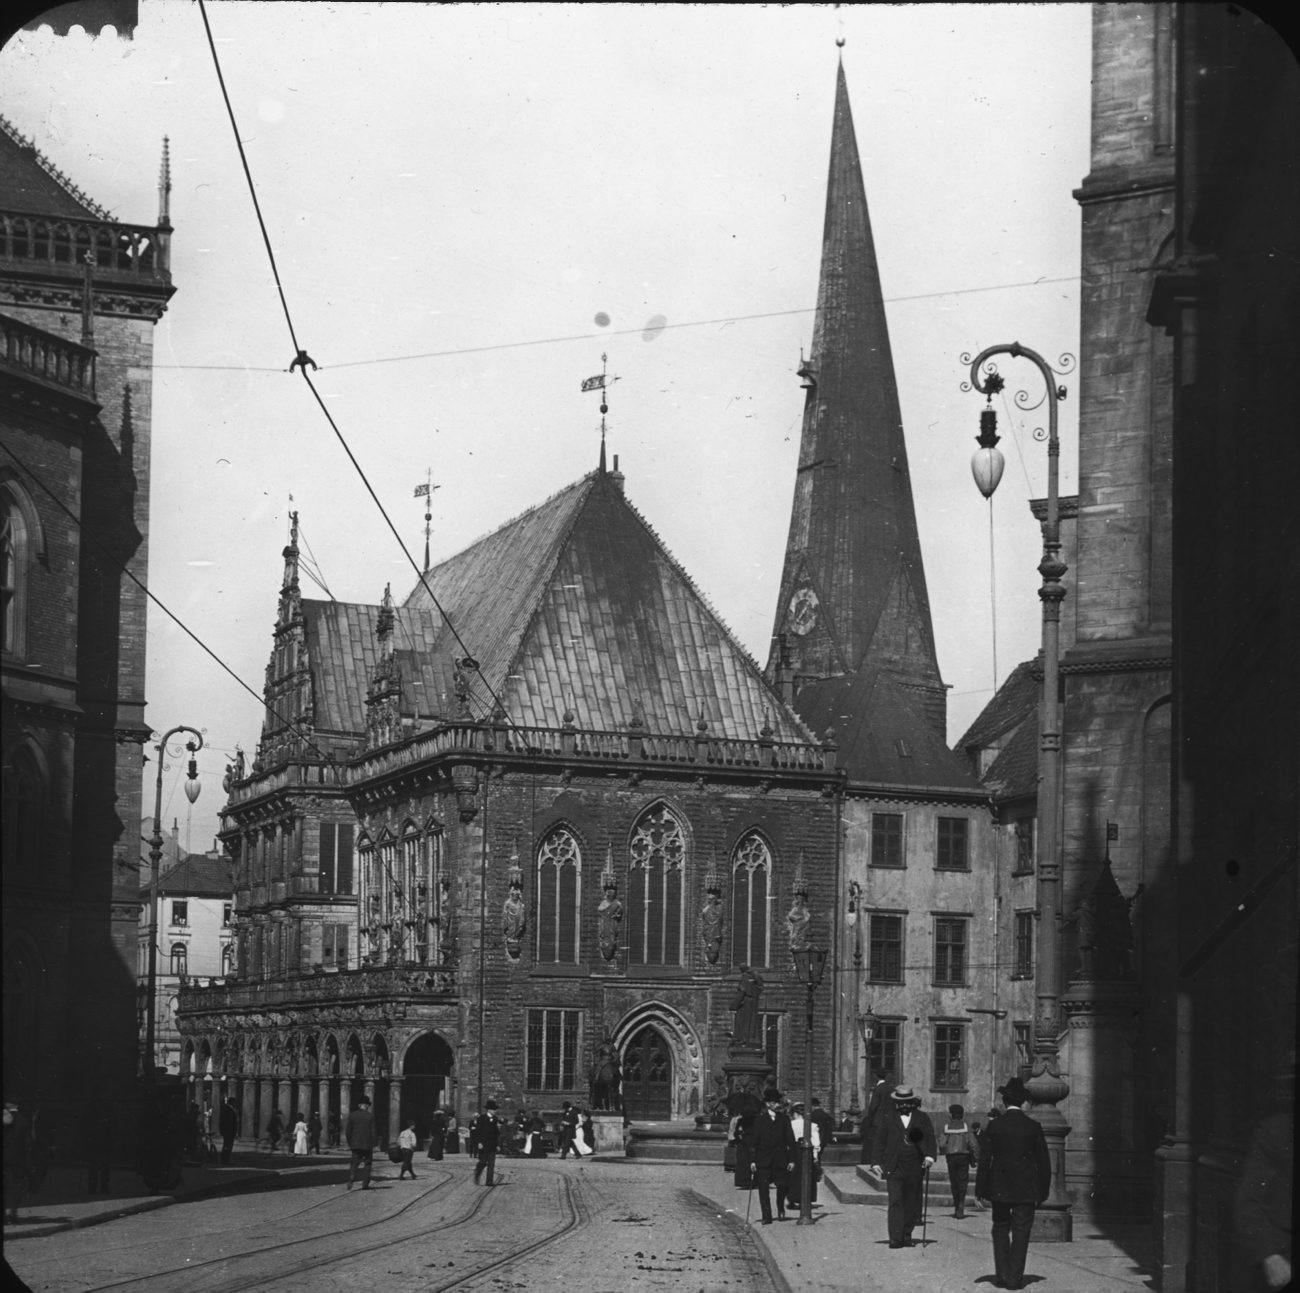 old black and white po of a church from the early 1900's